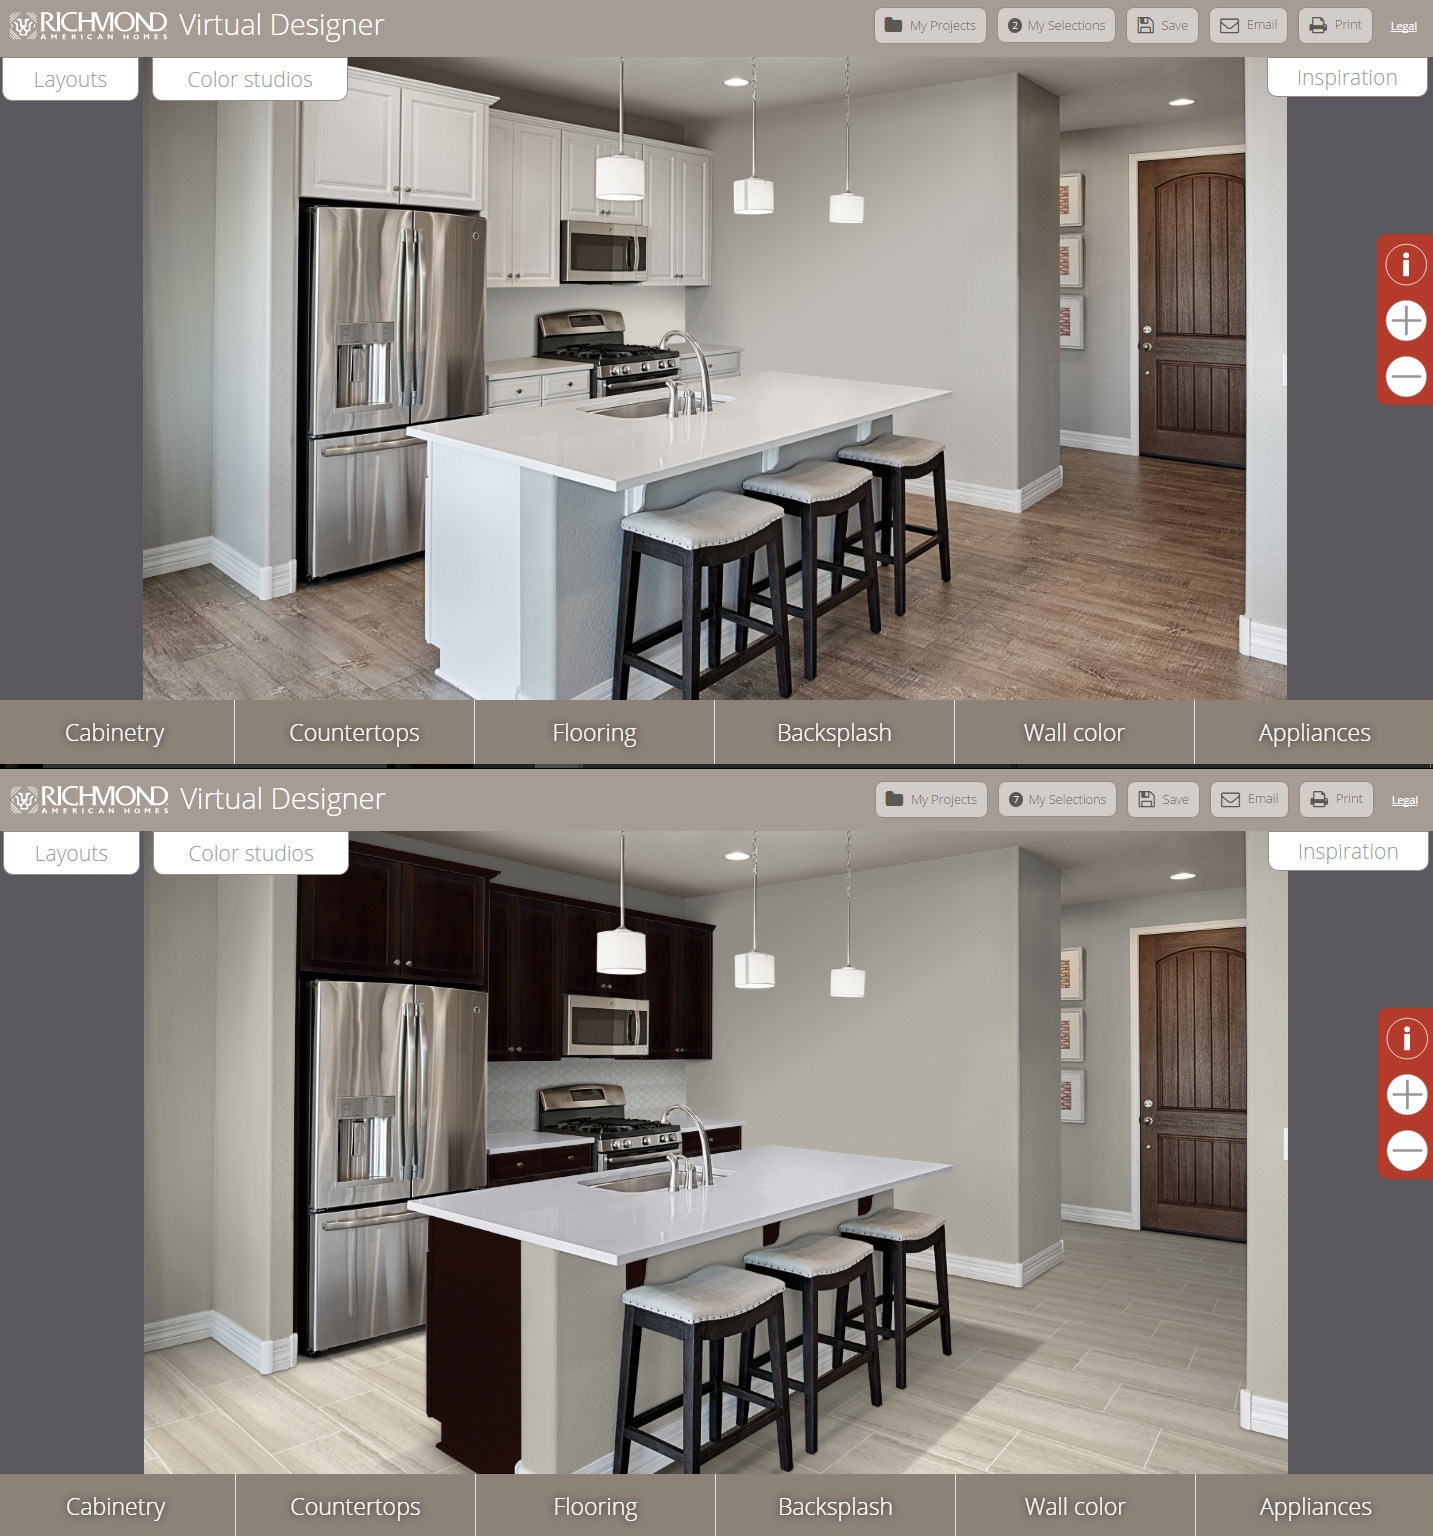 Arizona home builder launches virtual kitchen design tool | Woodworking